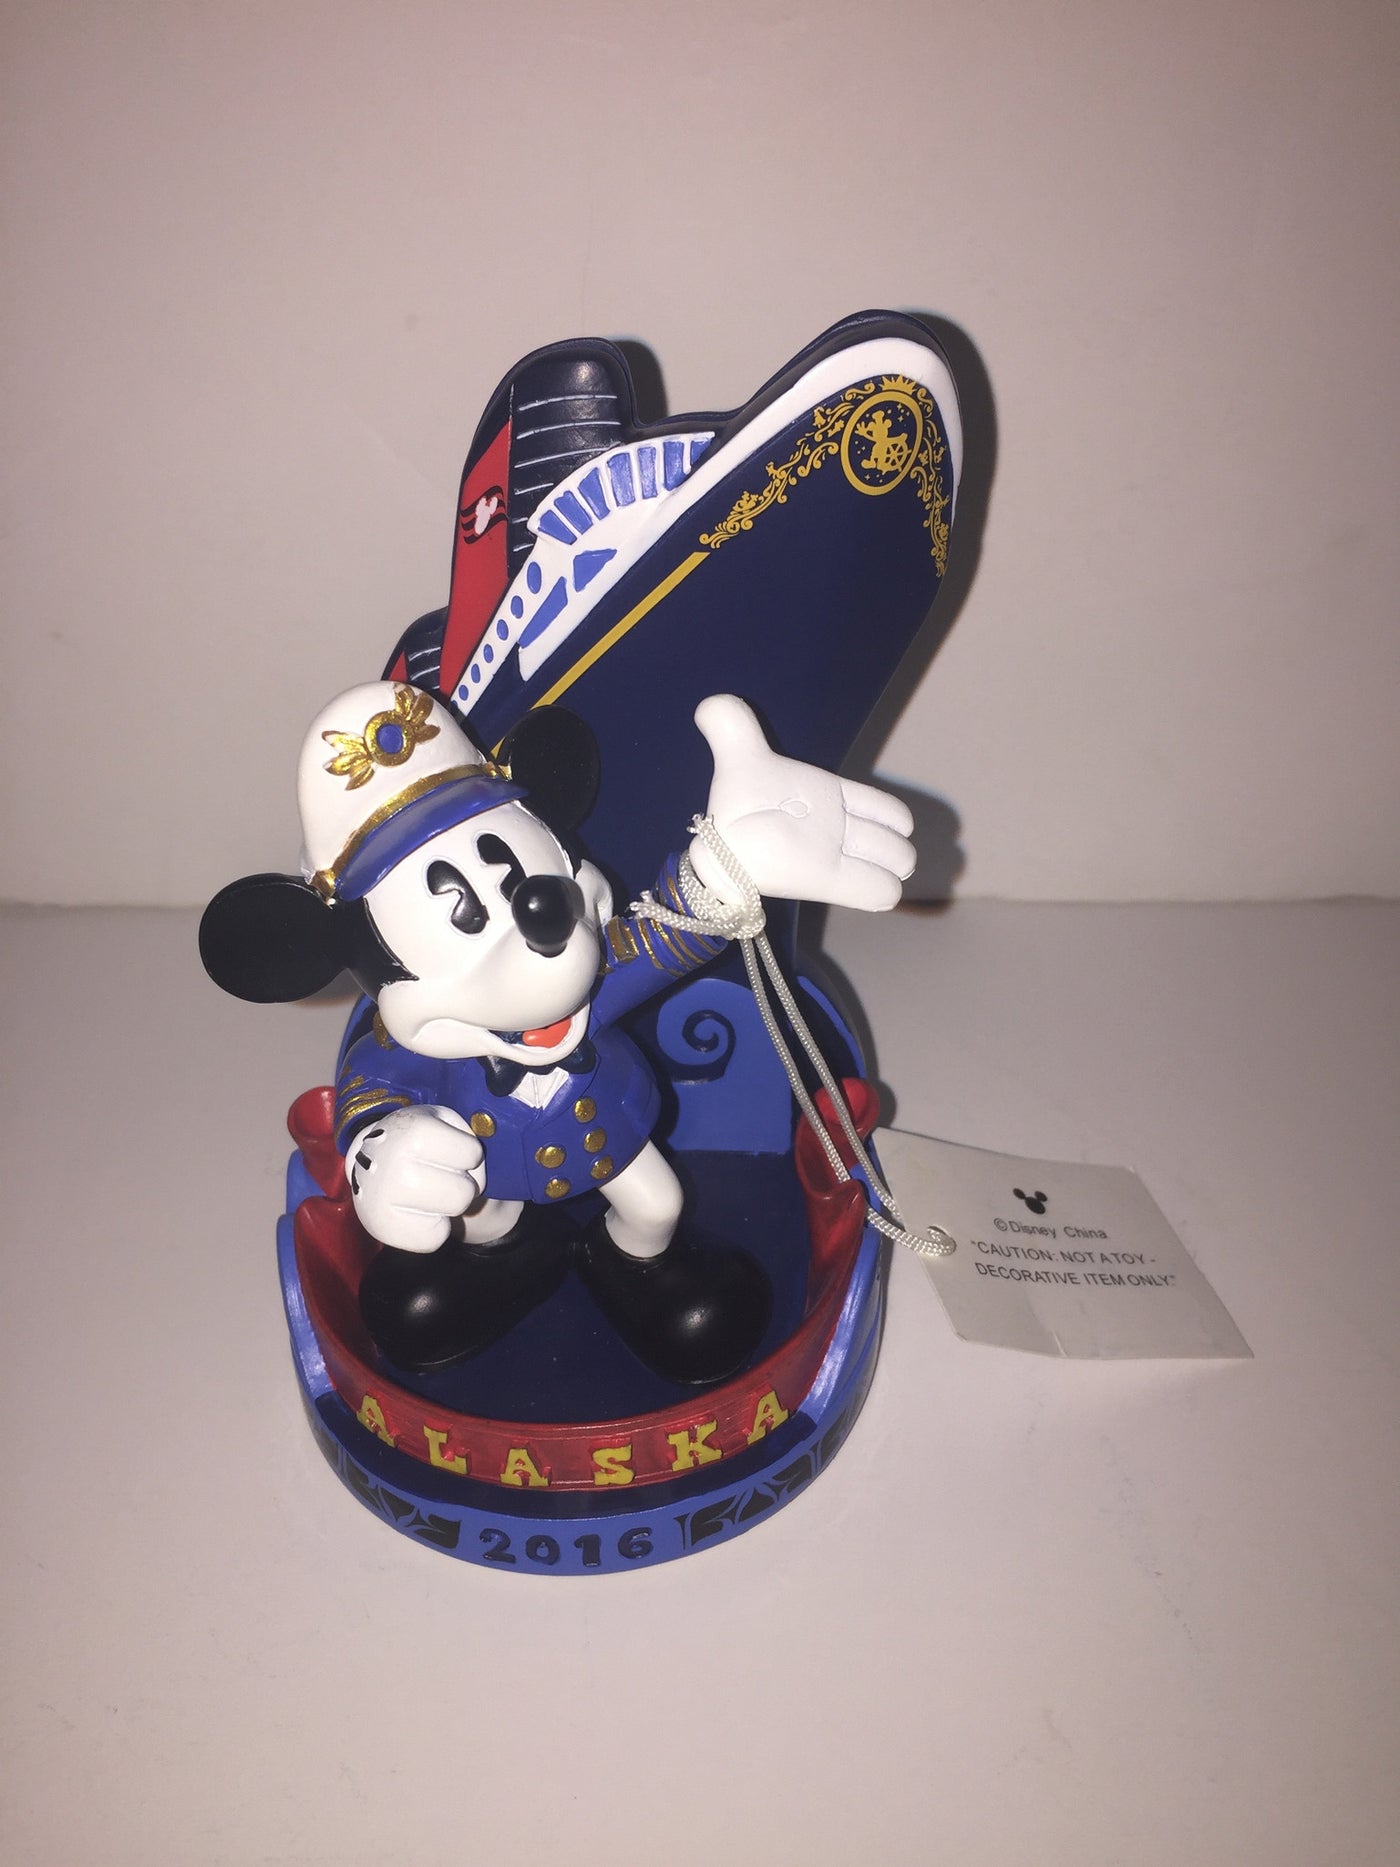 Disney Cruise Line Alaska 2016 Mickey Captain Photo Clip Frame New with Tags - I Love Characters